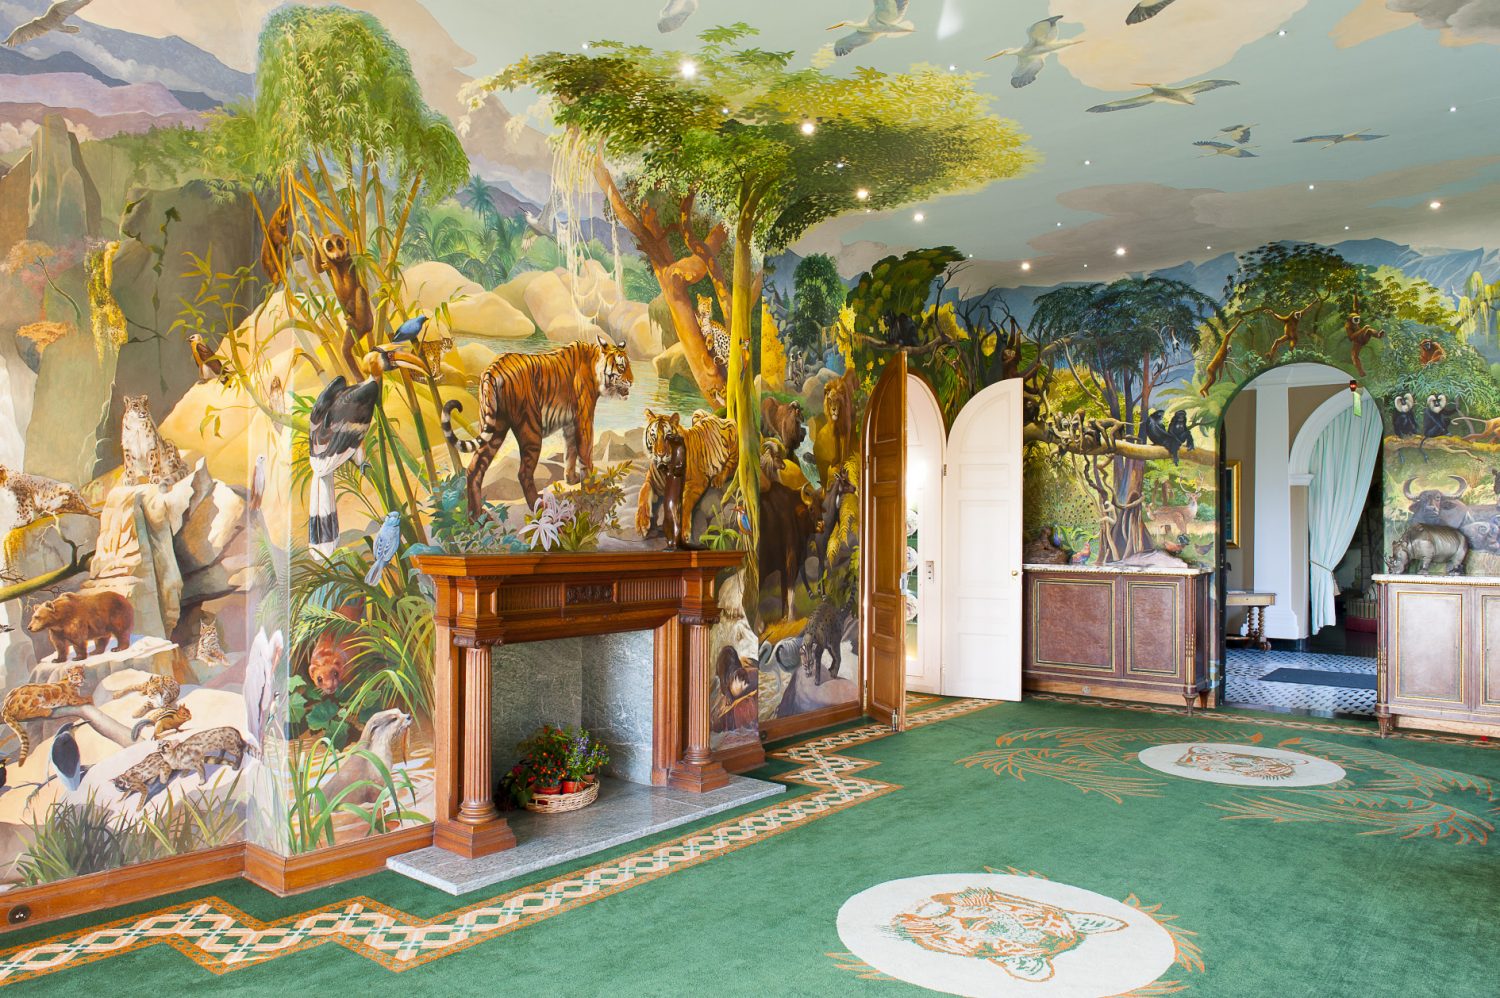 The vibrant Spencer Roberts room is adorned with images of animals in their natural habitats – from birds and reptiles to monkeys and bears. A grass green carpet adds to the feeling of being outside